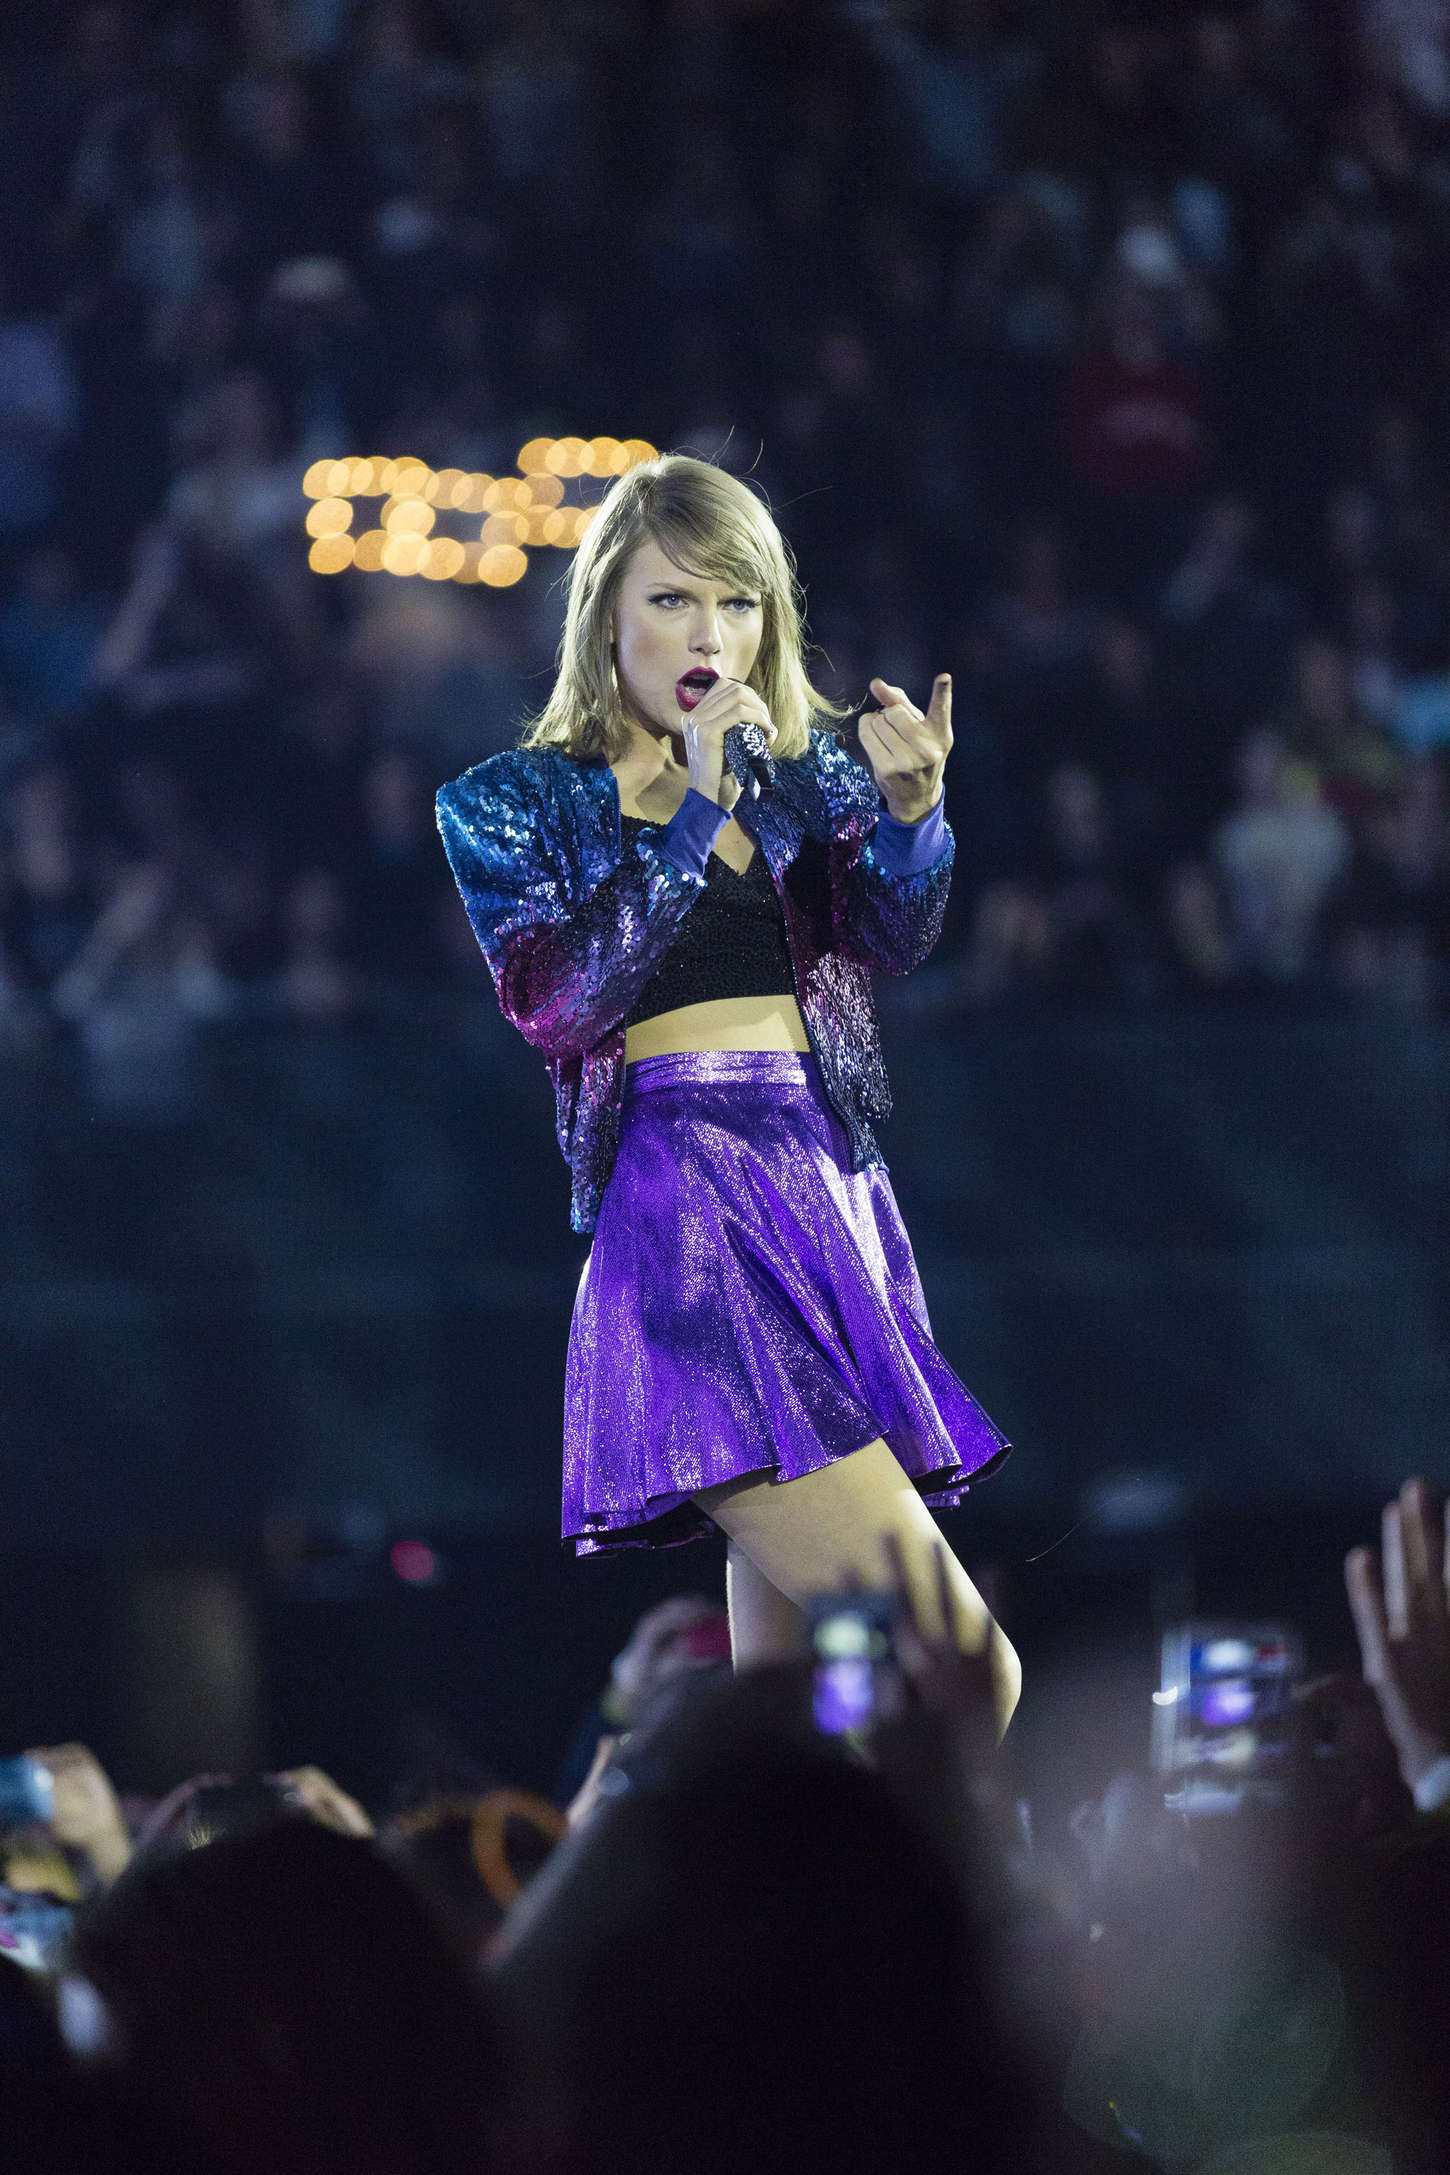 Taylor Swift photo 1264 of 2544 pics, wallpaper - photo #781687 - ThePlace2